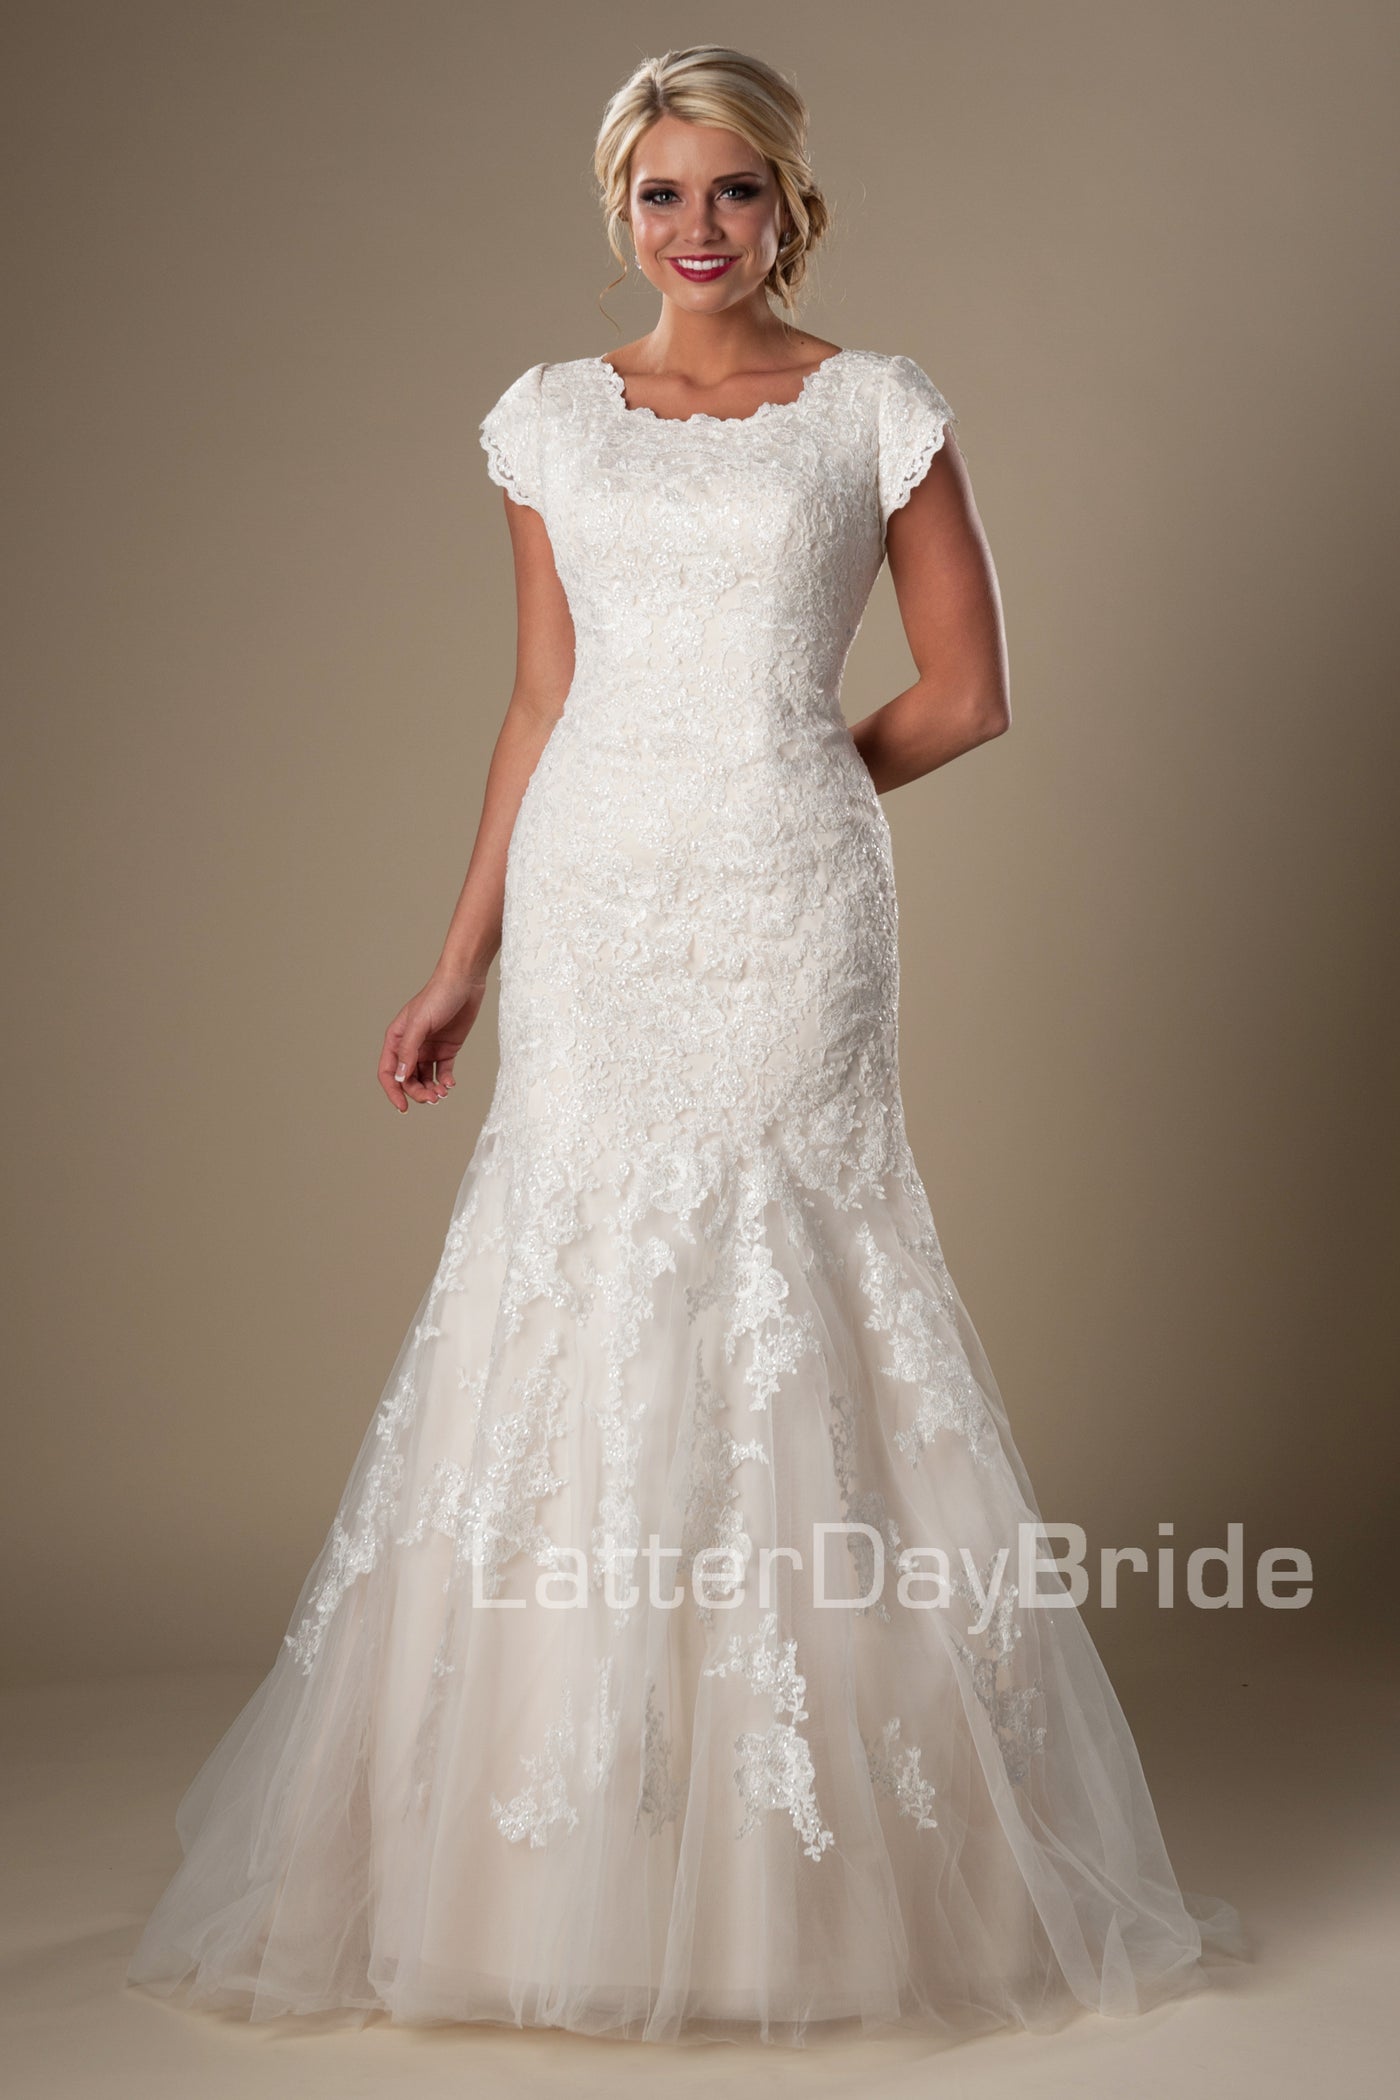 This darling modest bridal gown features a subtle splash of sequins decorating a soft lace and mermaid silhouette, modest wedding dresses, salt lake city, front view